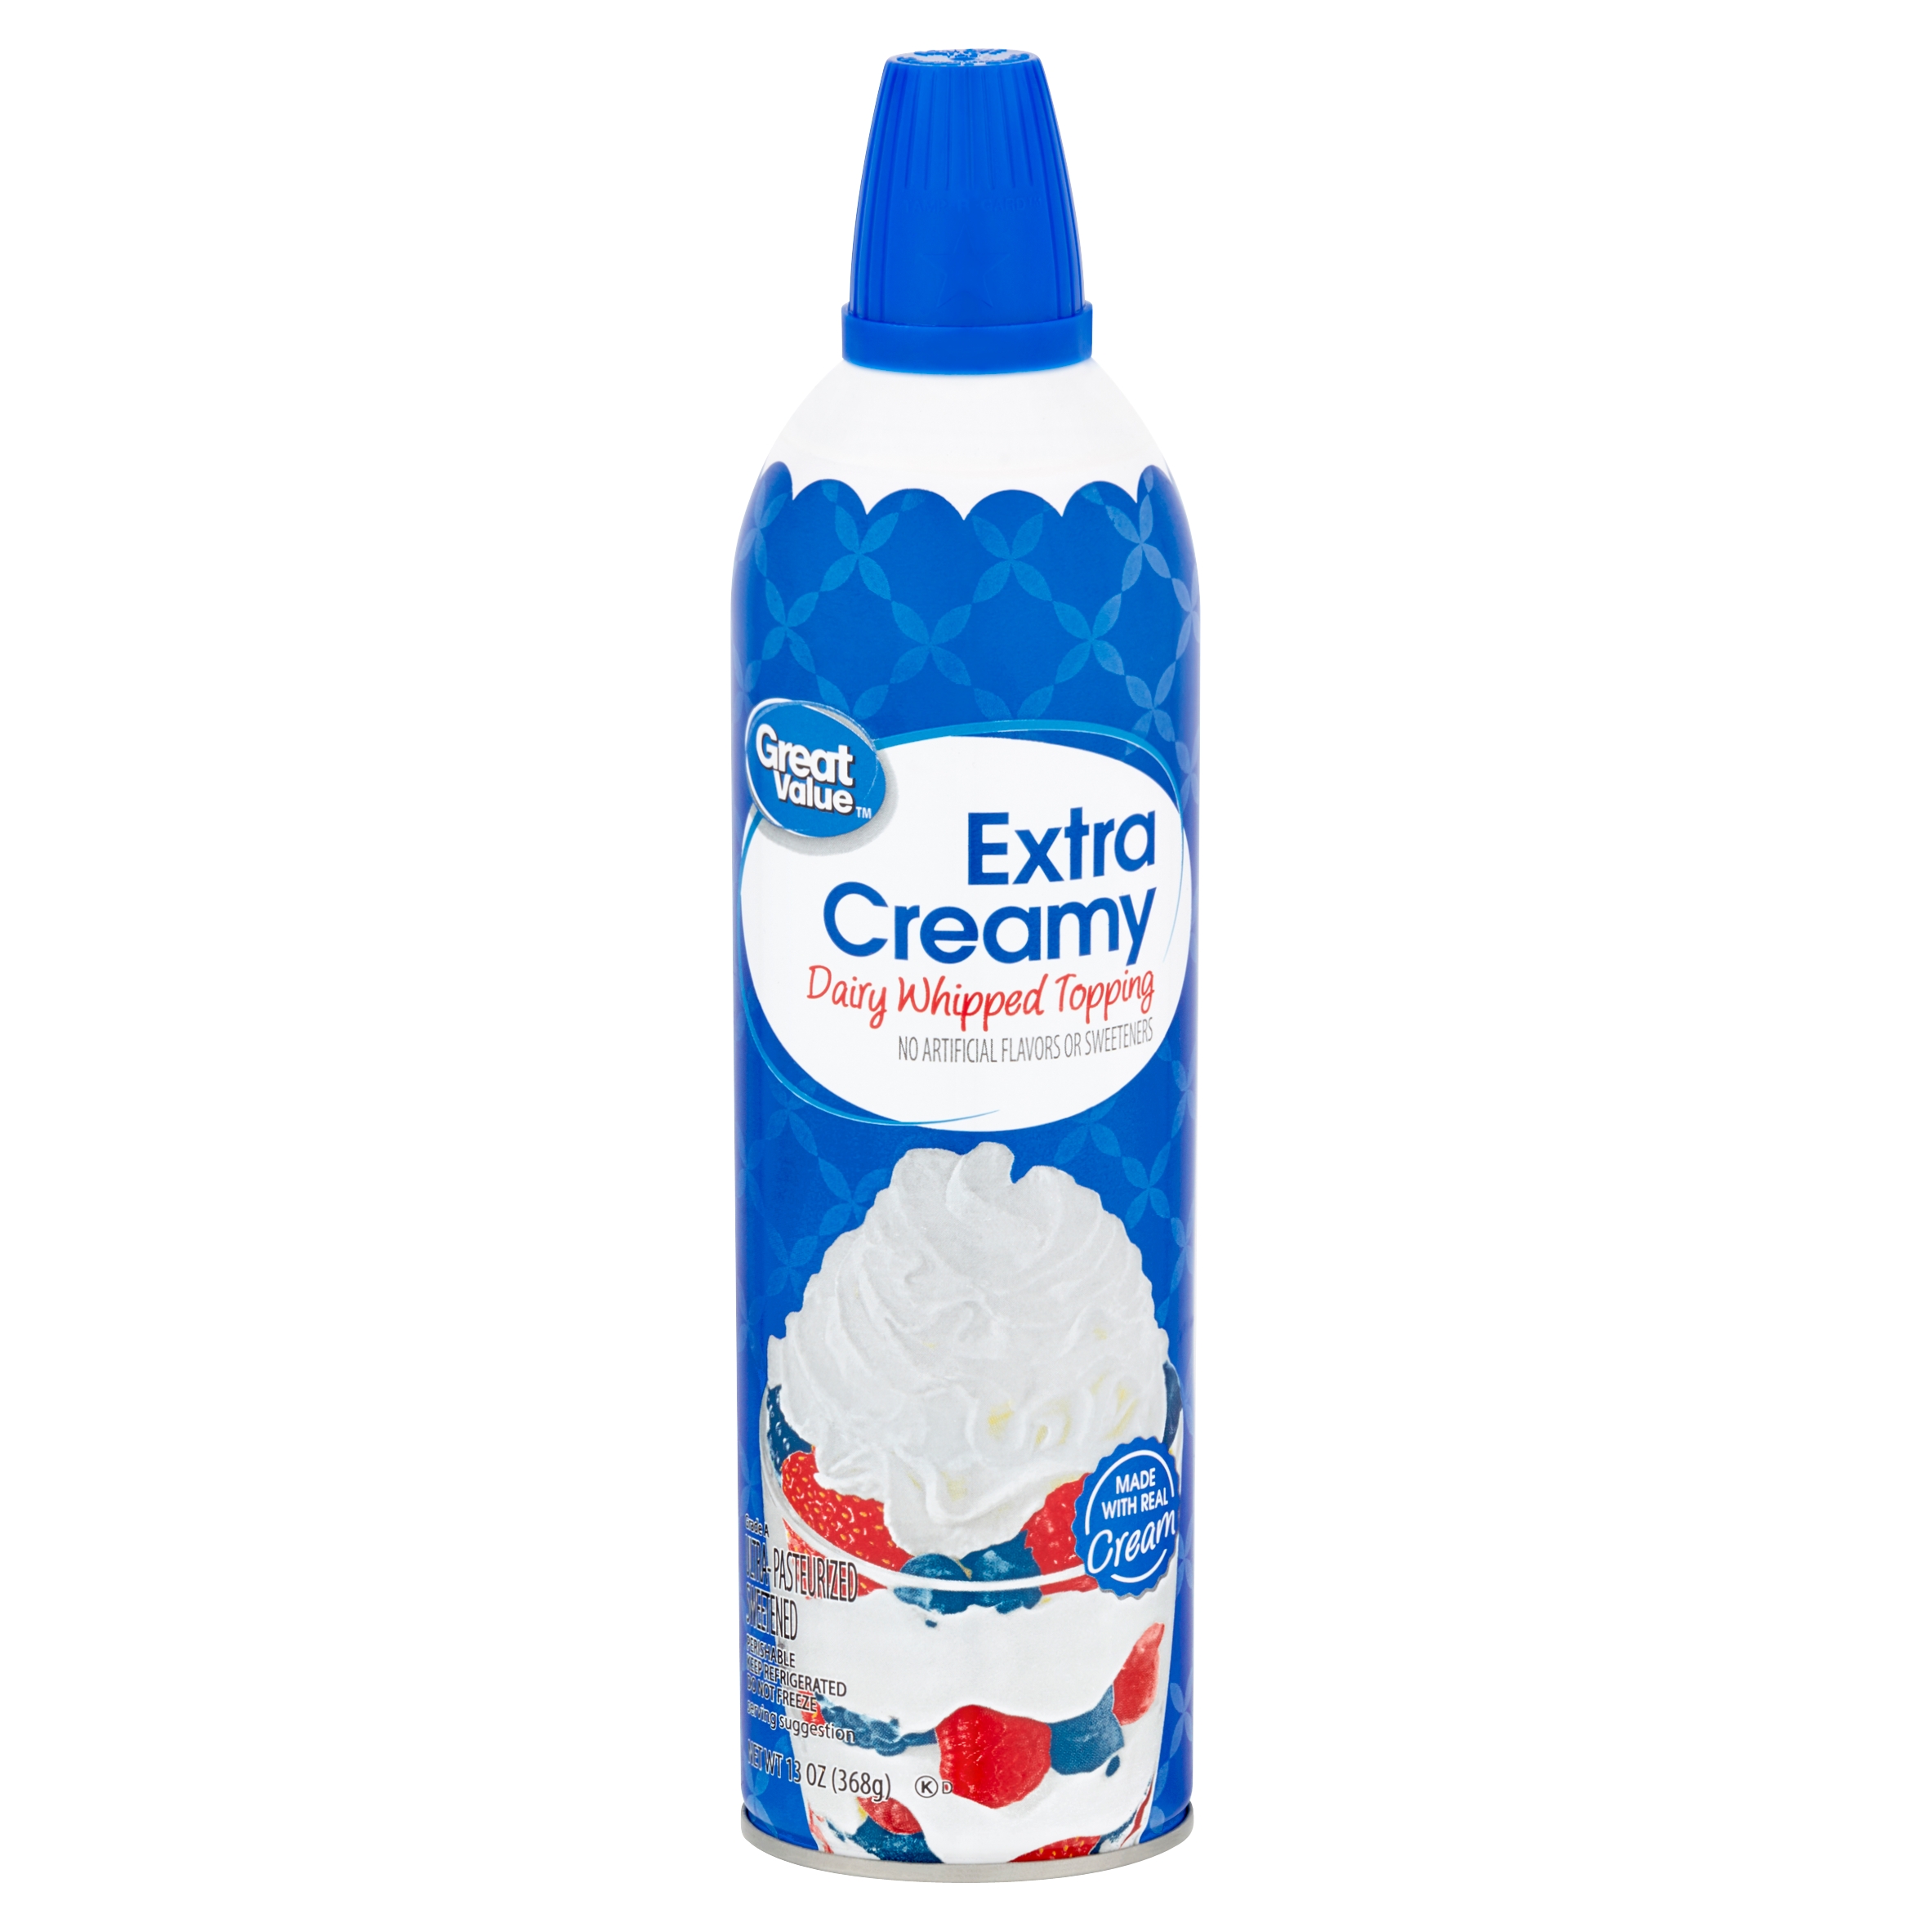 Great Value Extra Creamy Dairy Whipped Topping, 13 Oz Image